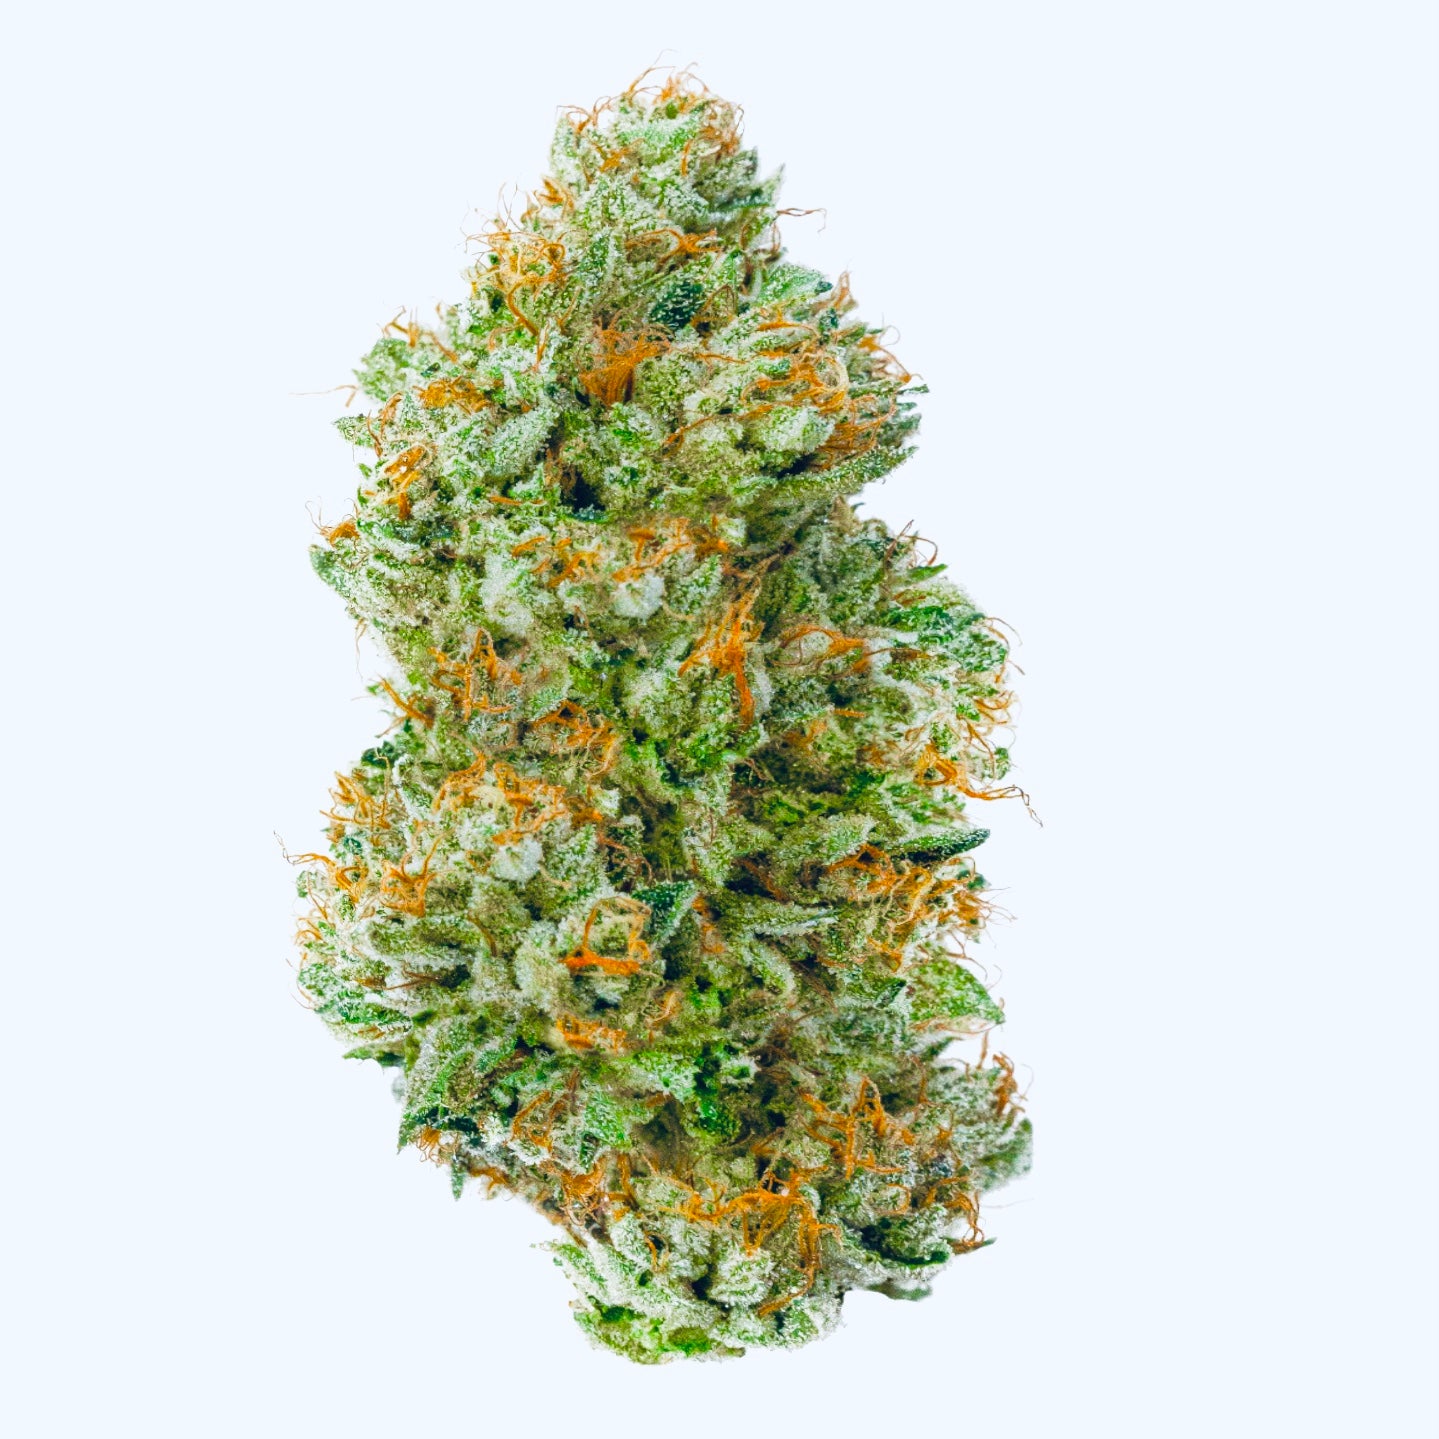 A cannabis flower nug of the London Pound Cake strain stands before a clear background.